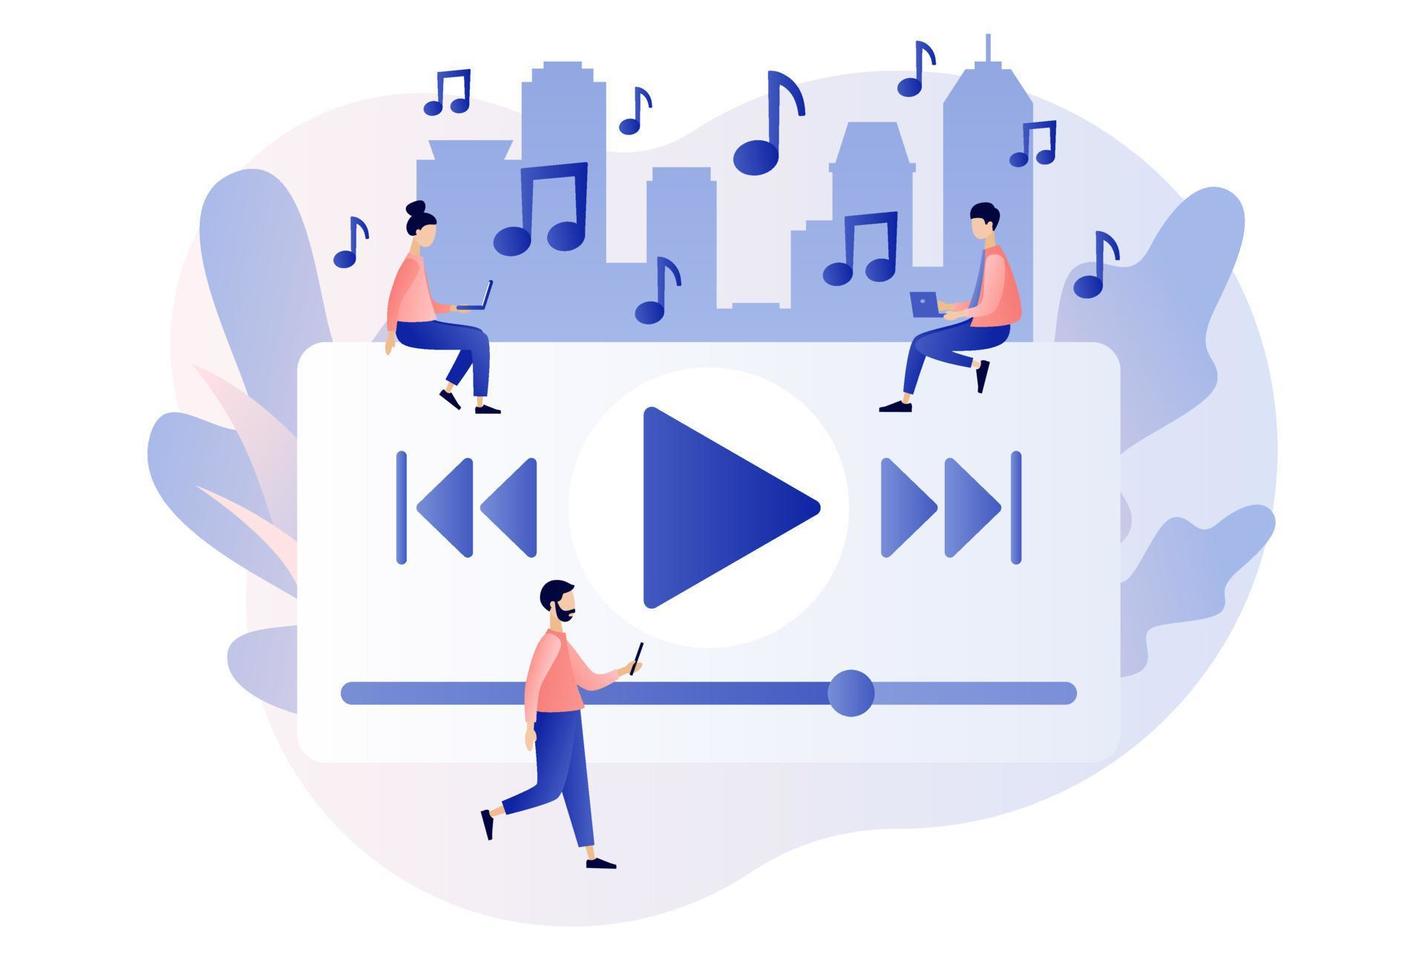 Media player. Tiny people listen music, sound, audio or radio online with smartphone app or laptop. Music play list. Modern flat cartoon style. Vector illustration on white background